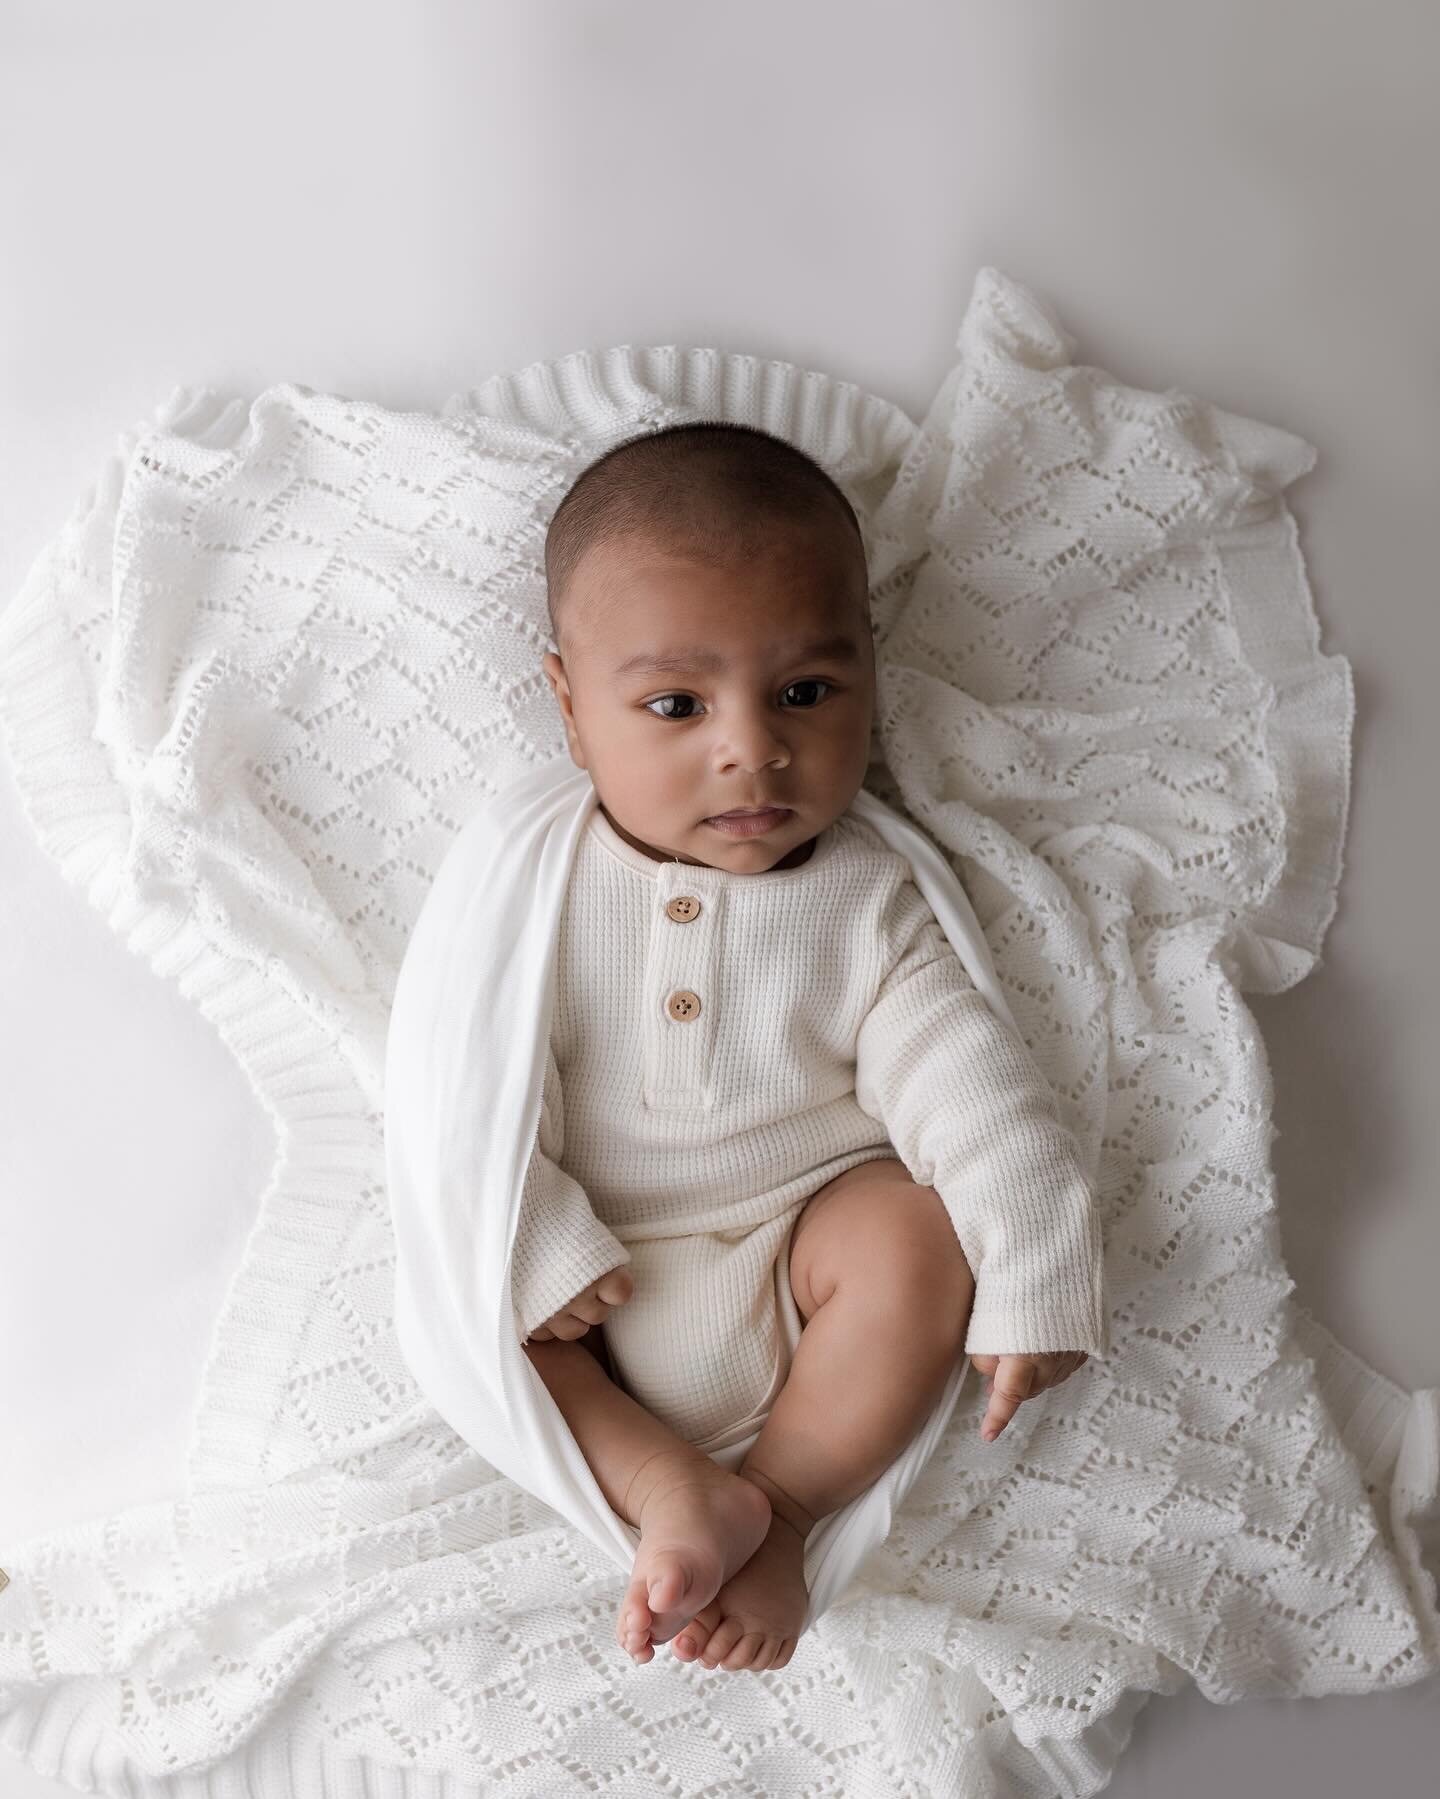 Hey there! If you've missed out on the chance to have a newborn photoshoot for your little bundle of joy, don't worry! You can still capture some adorable moments even if your baby is a bit older. Just keep in mind that once your baby is over a month